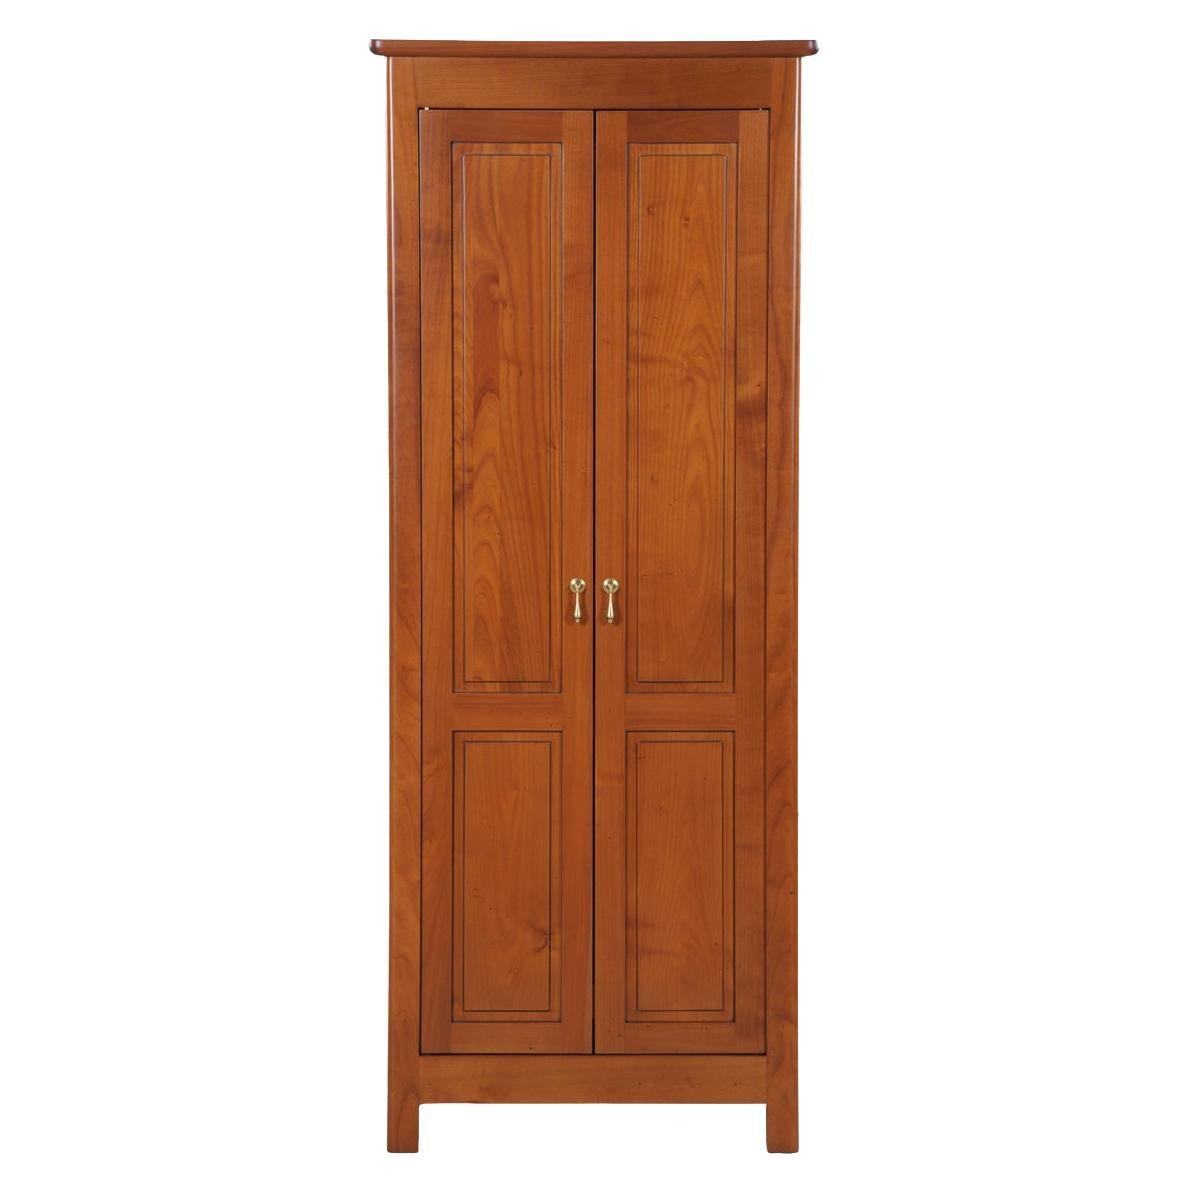 French Armoirette Cabinet with 1 folding Door in solid stained cherry wood For Sale